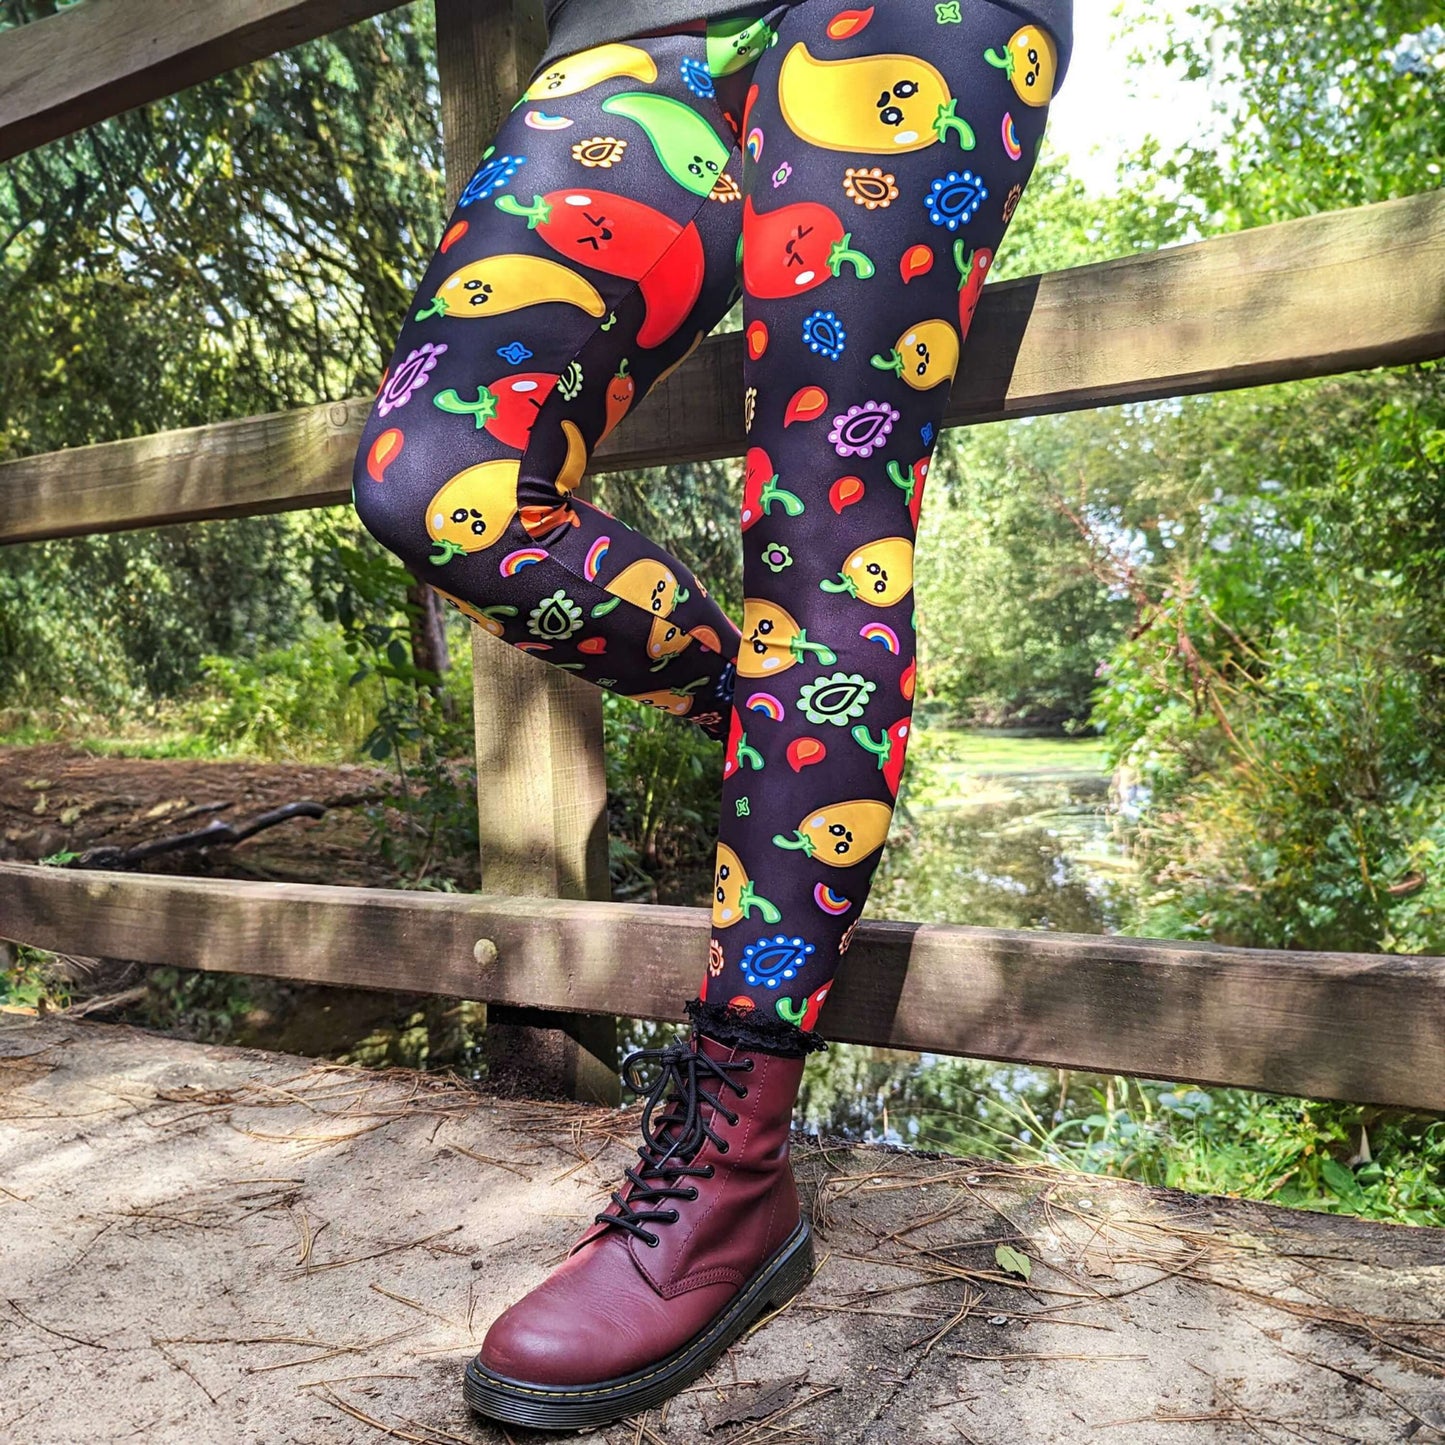 A person leaning against a fence wearing Black leggings with red, green, orange and yellow chilli peppers with cute faces on and various cute doodles around them. The hand drawn design is raising awareness for neurodiversity.